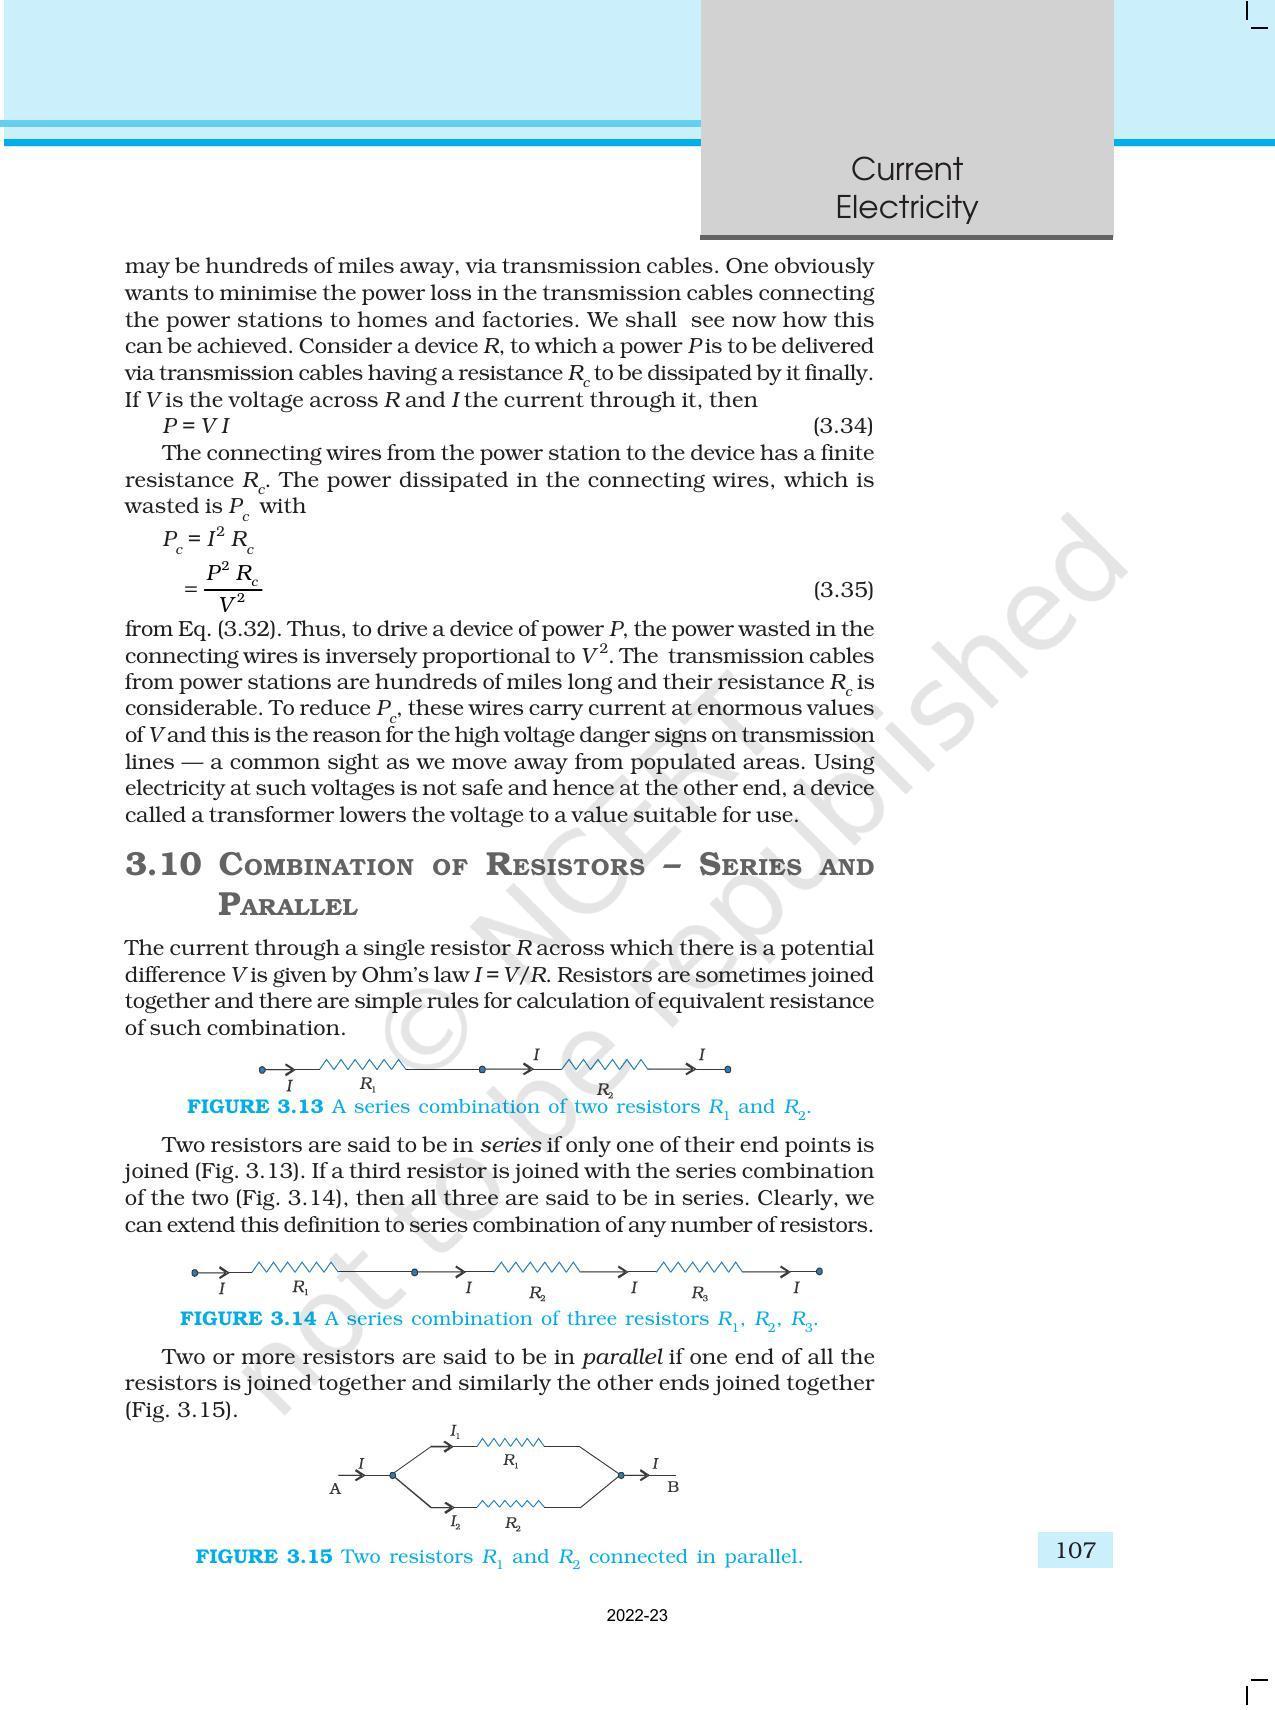 NCERT Book for Class 12 Physics Chapter 3 Current Electricity - Page 15